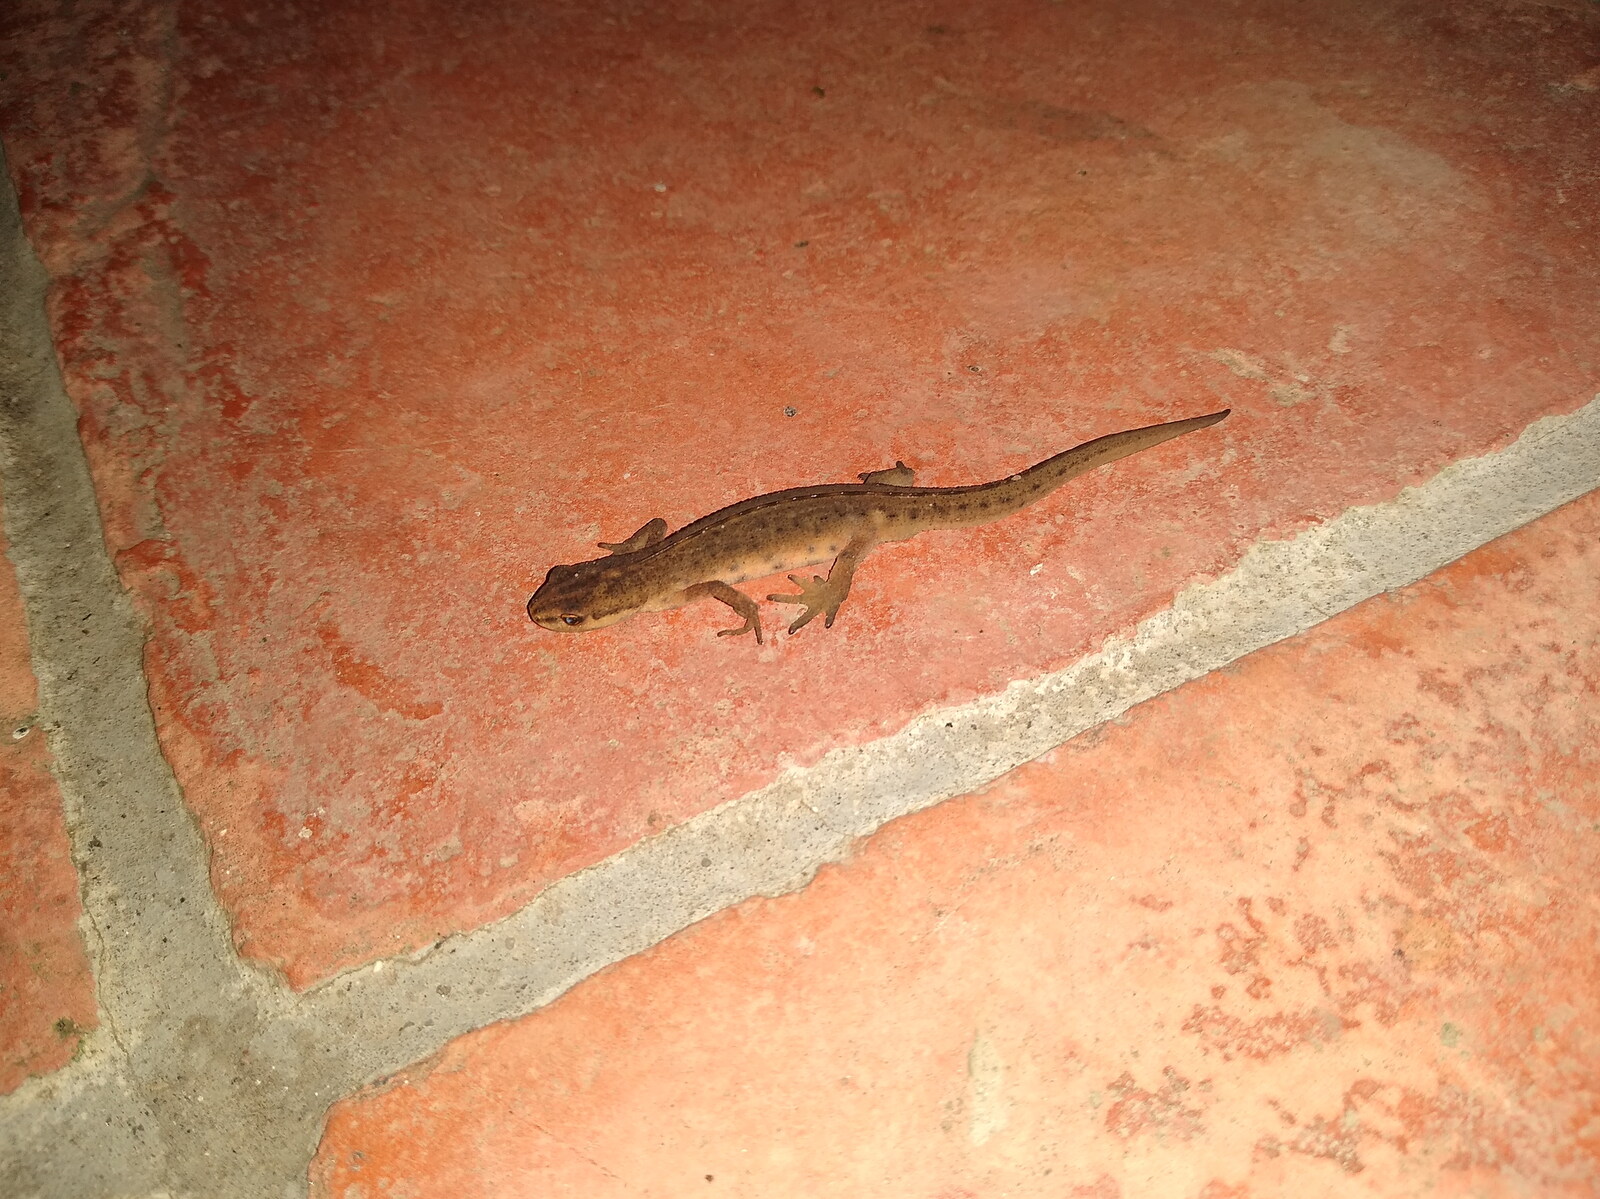 There's an actual lizard on the porch from Dove Players' Trouble in Pantoland, Eye Community Centre, Suffolk - 11th December 2021